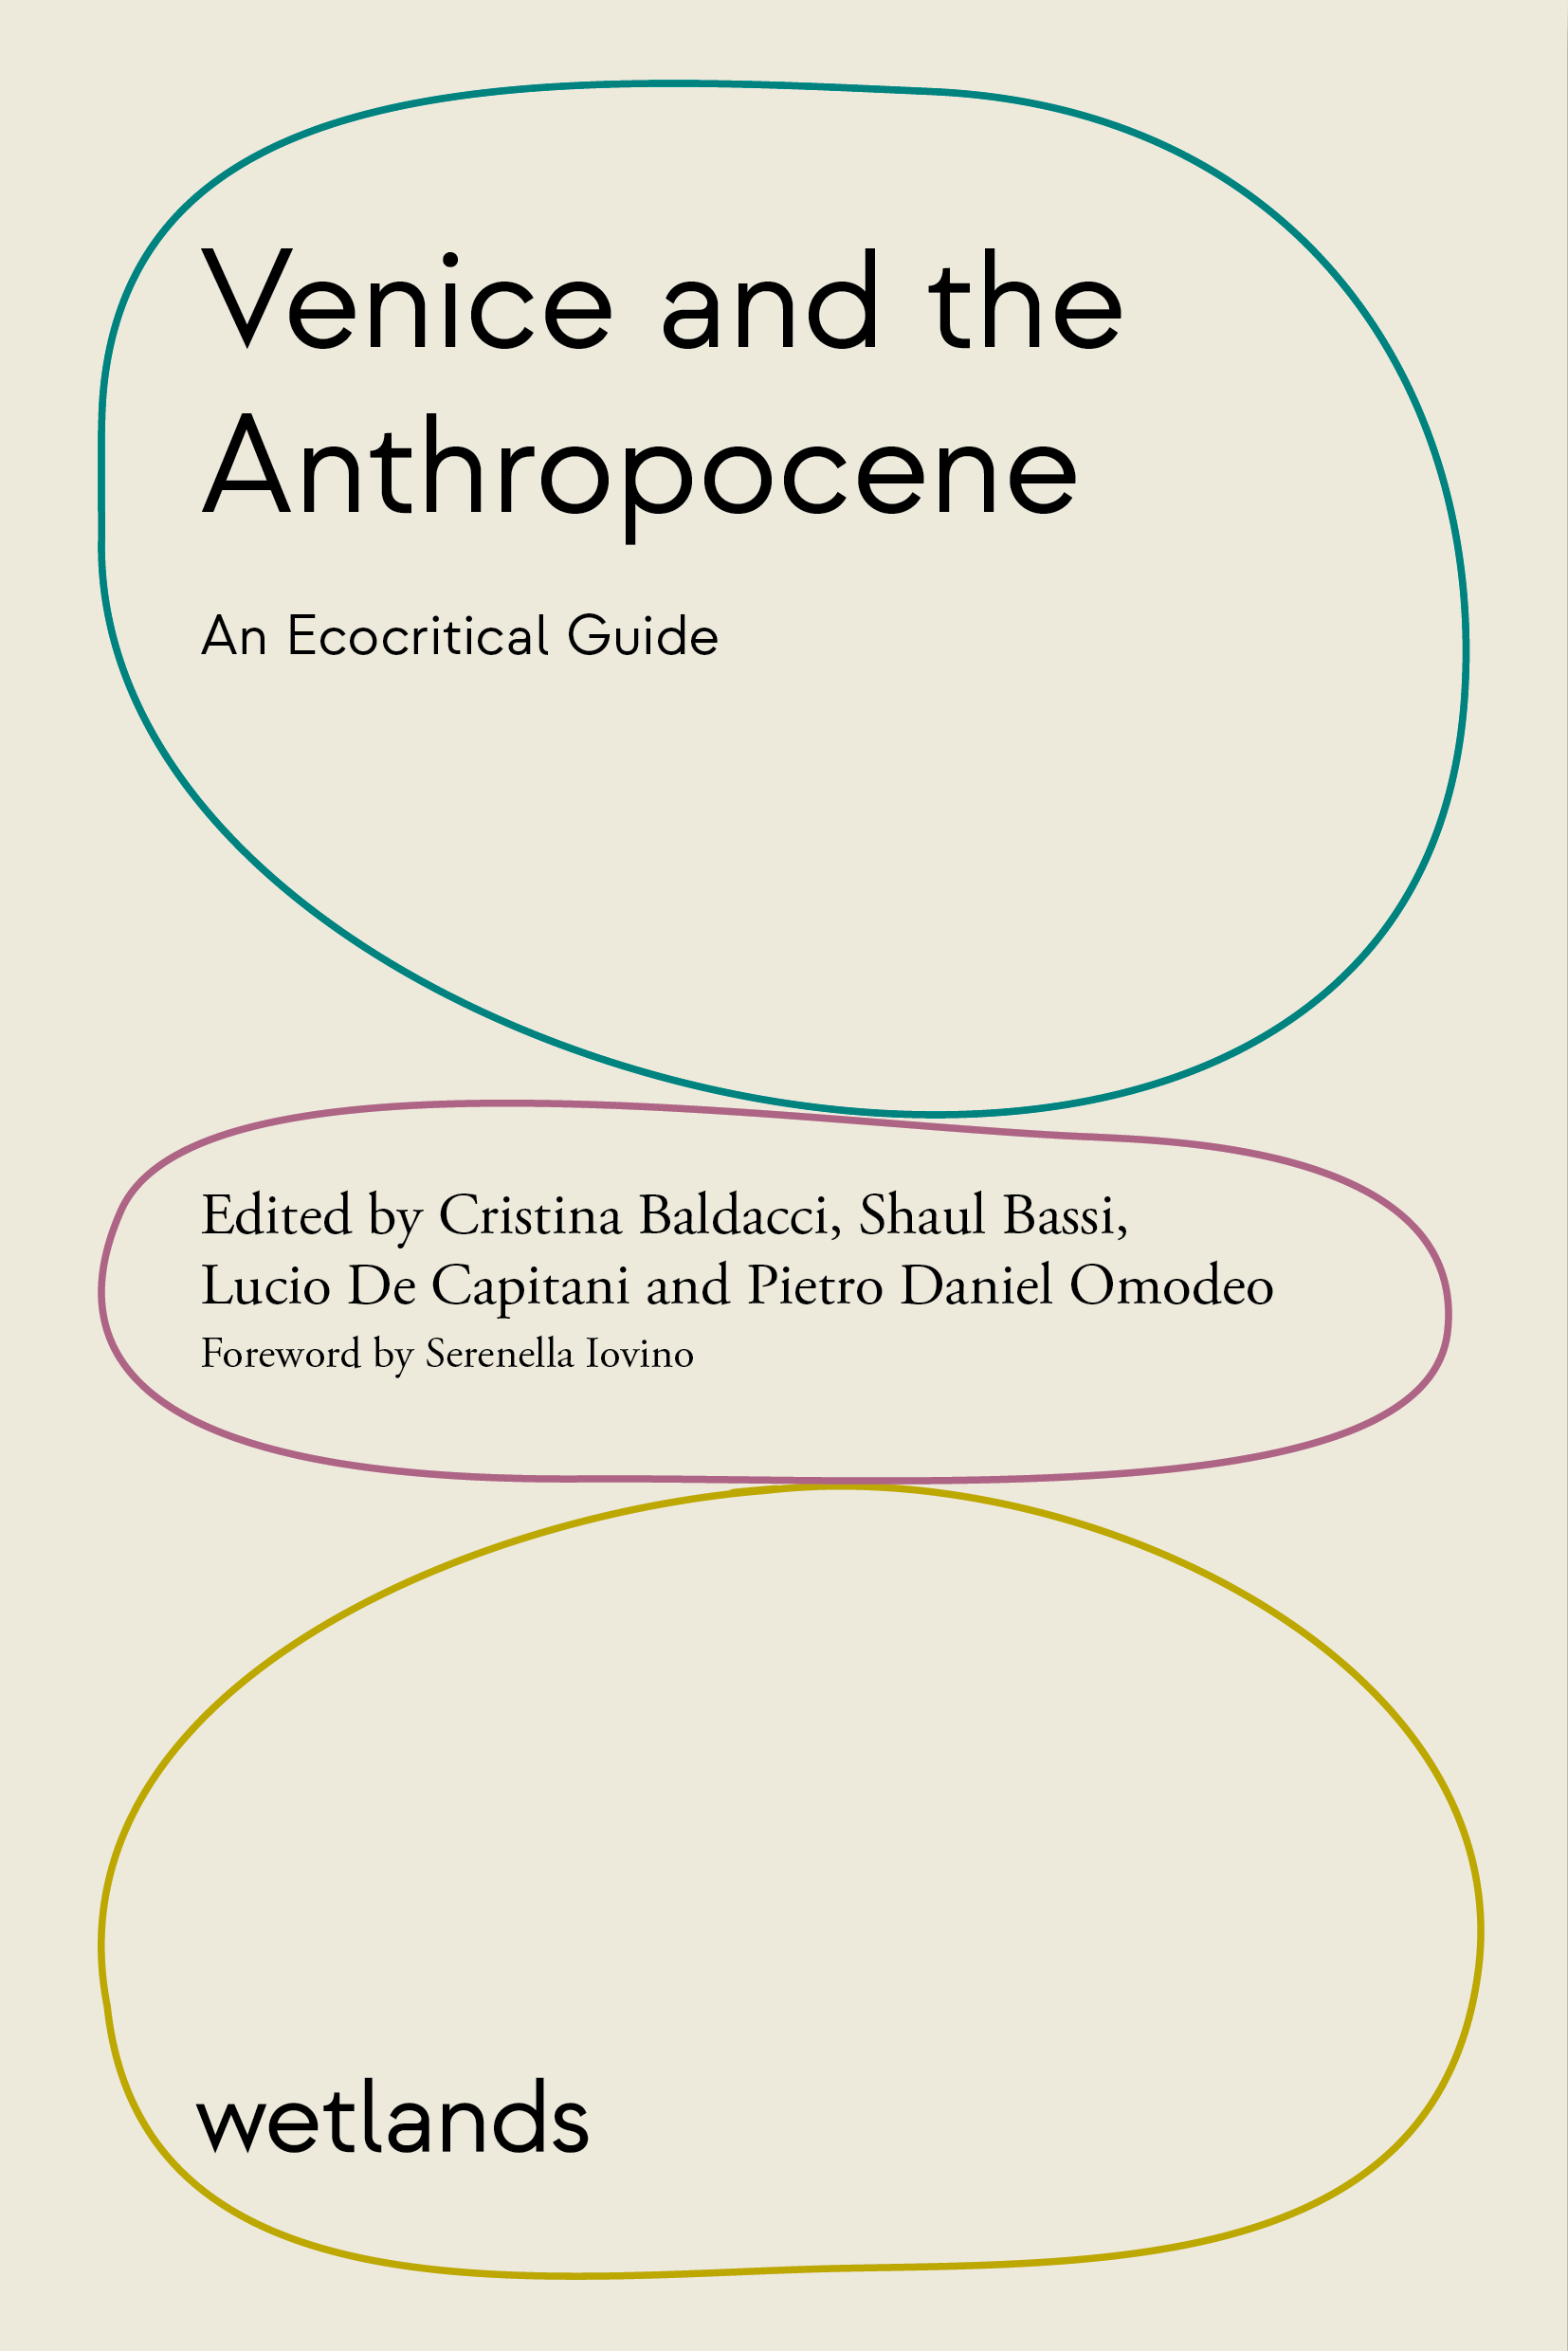 Venice and the Anthropocene cover.